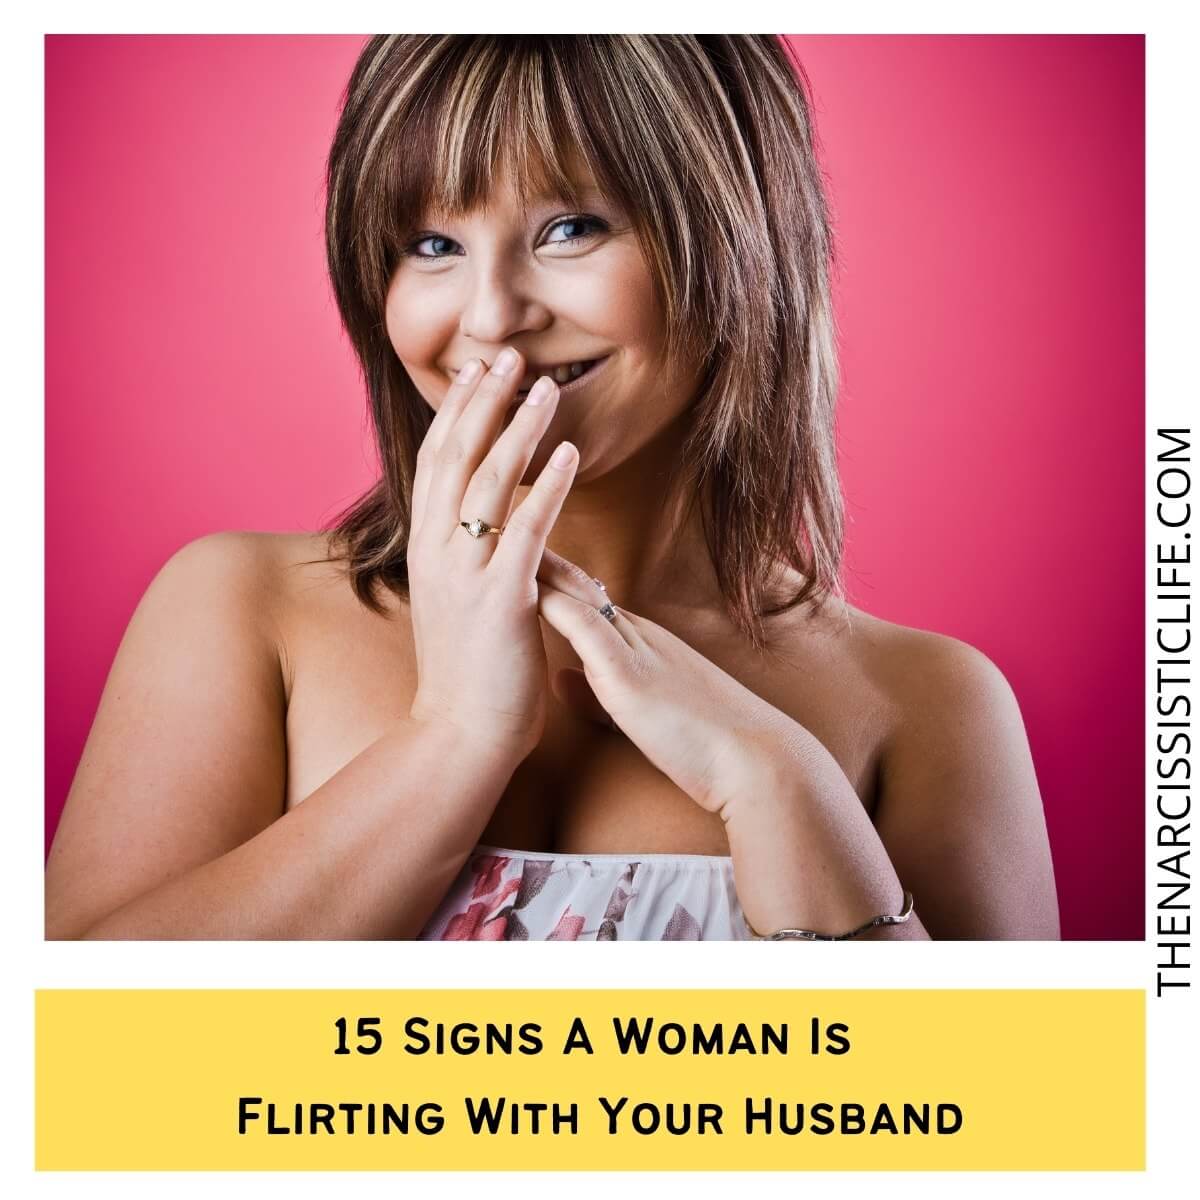 15 Signs A Woman Is Flirting With Your Husband image